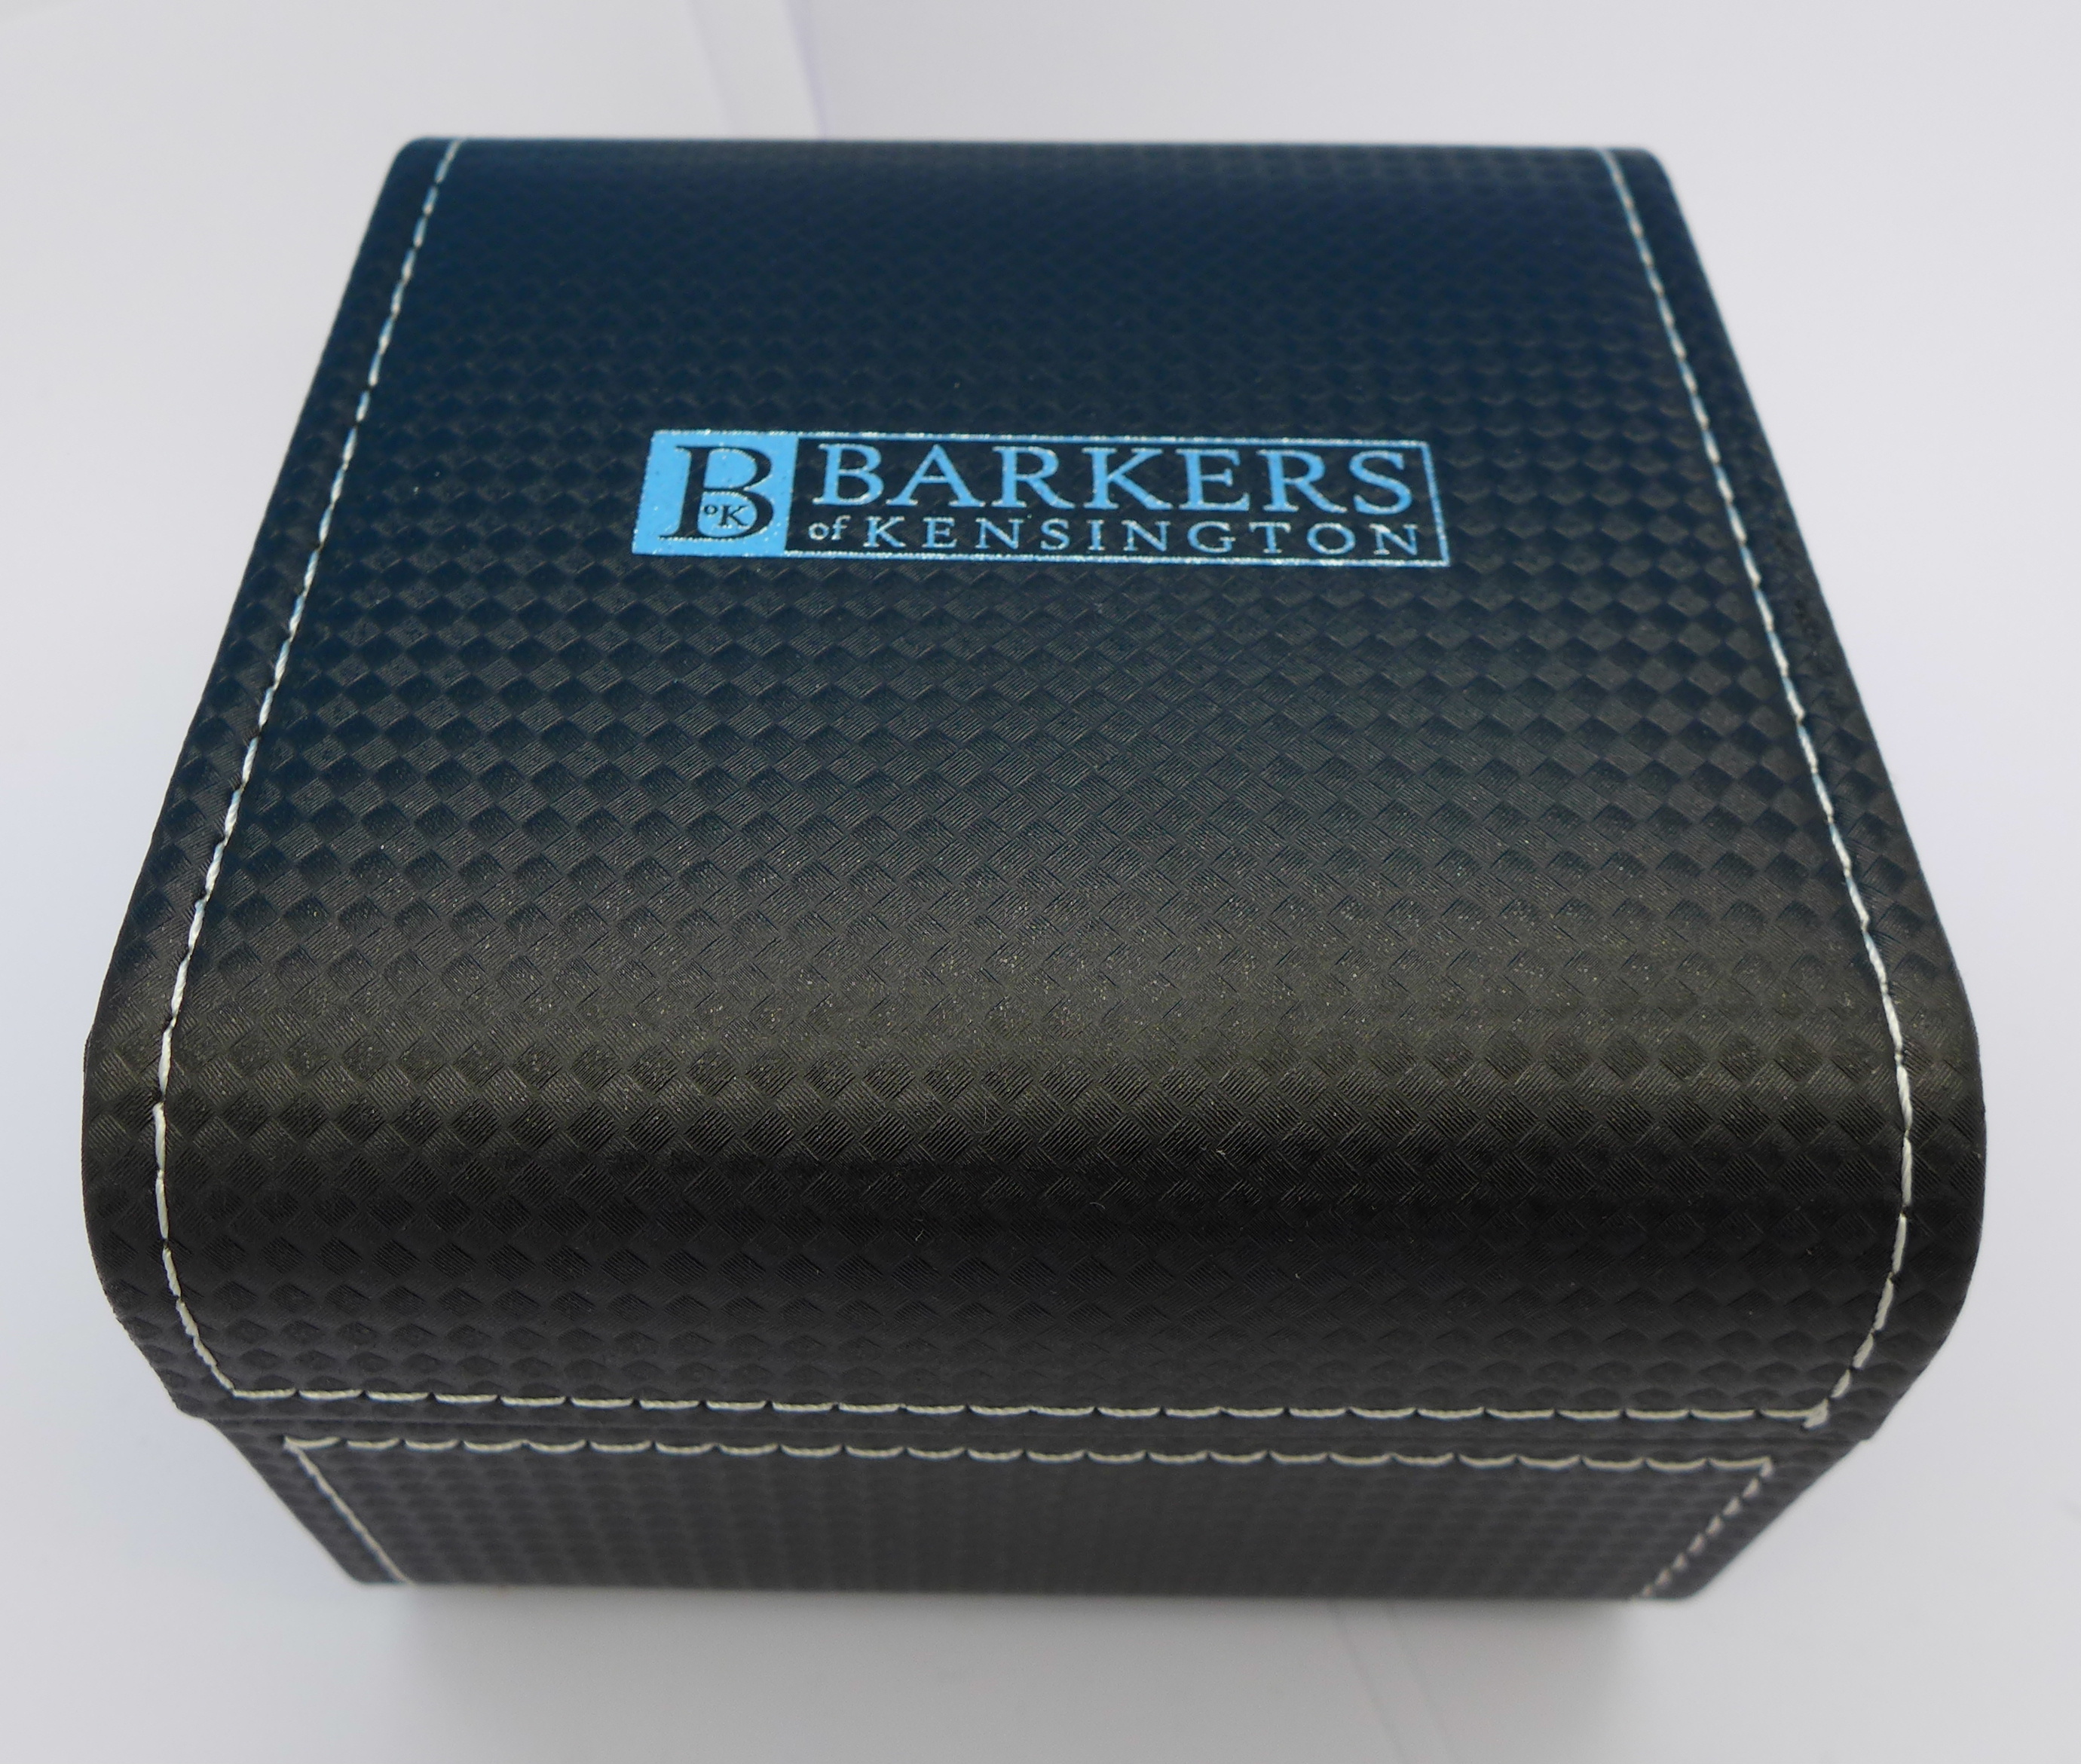 A Barkers of Kensington wristwatch, Entourage Rose, new and boxed, - Image 3 of 3